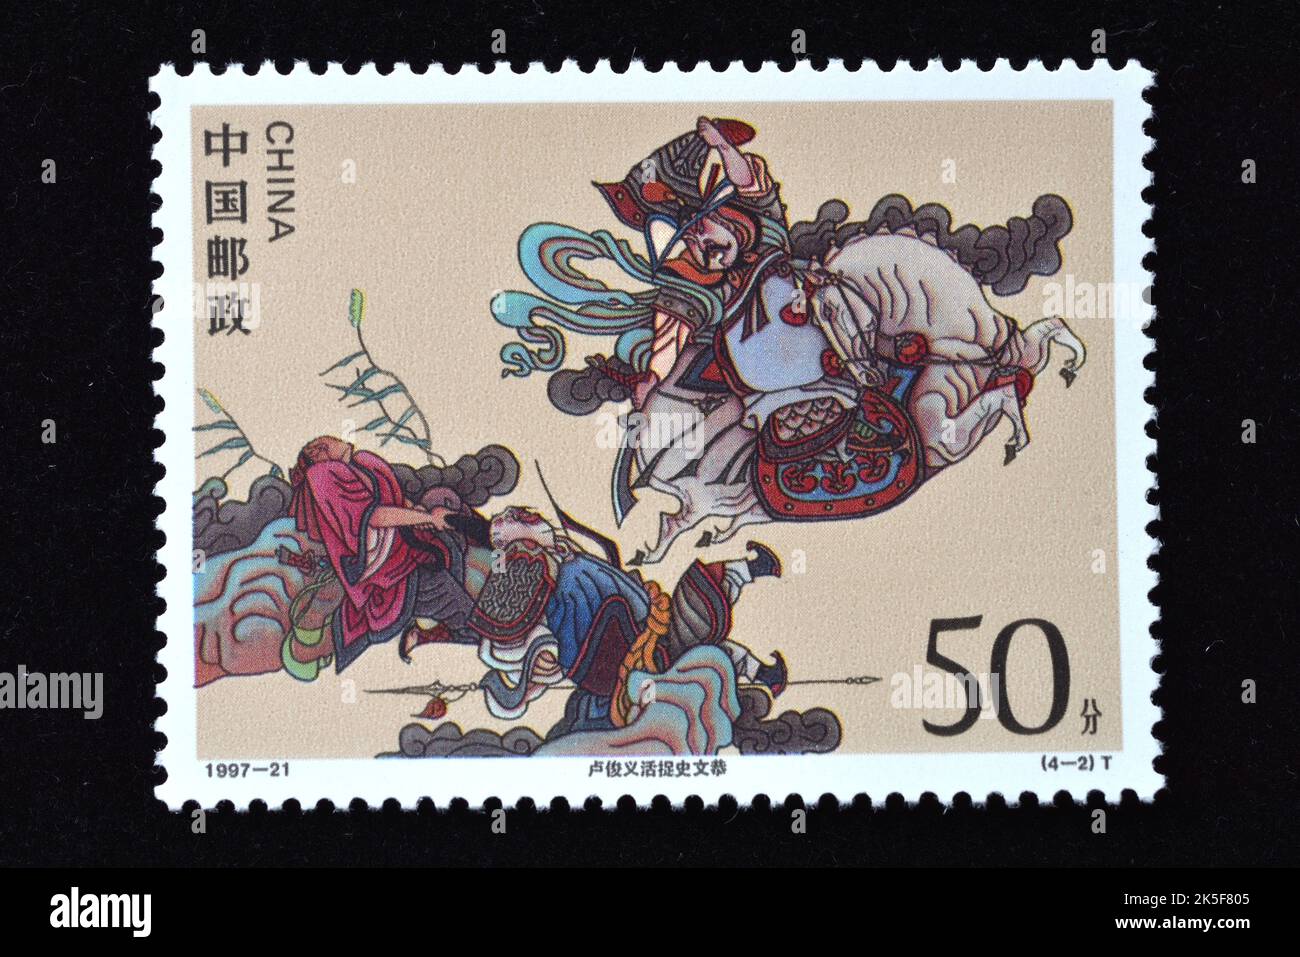 CHINA - CIRCA 1997: A stamp printed in China shows 1997-21, Scott 2822-26 The Outlaws of the Marsh- A Literary Masterpiece of Ancient China (5th serie Stock Photo